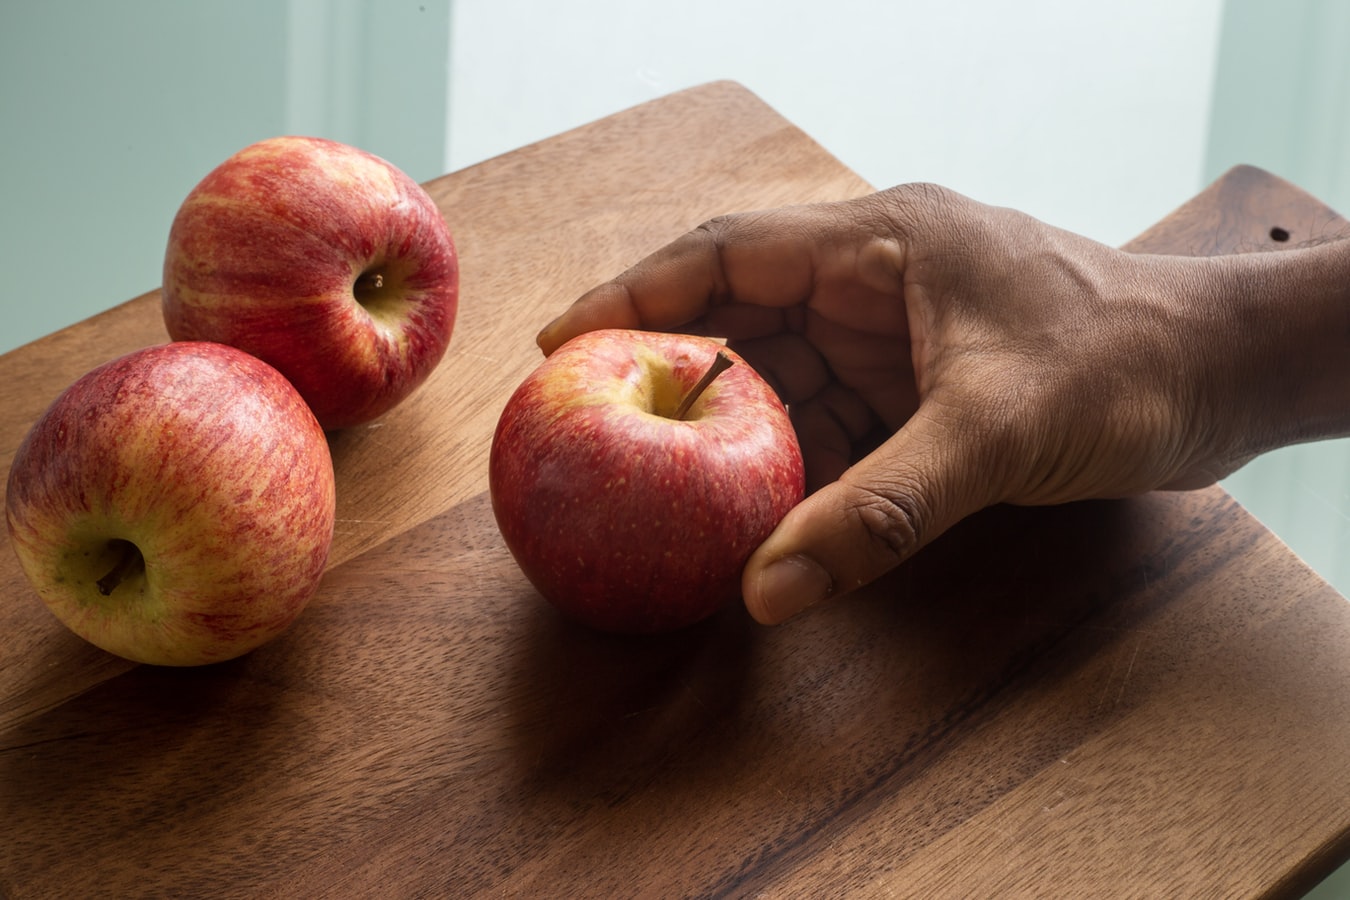 Where Eating Bad Apples Can Lead You